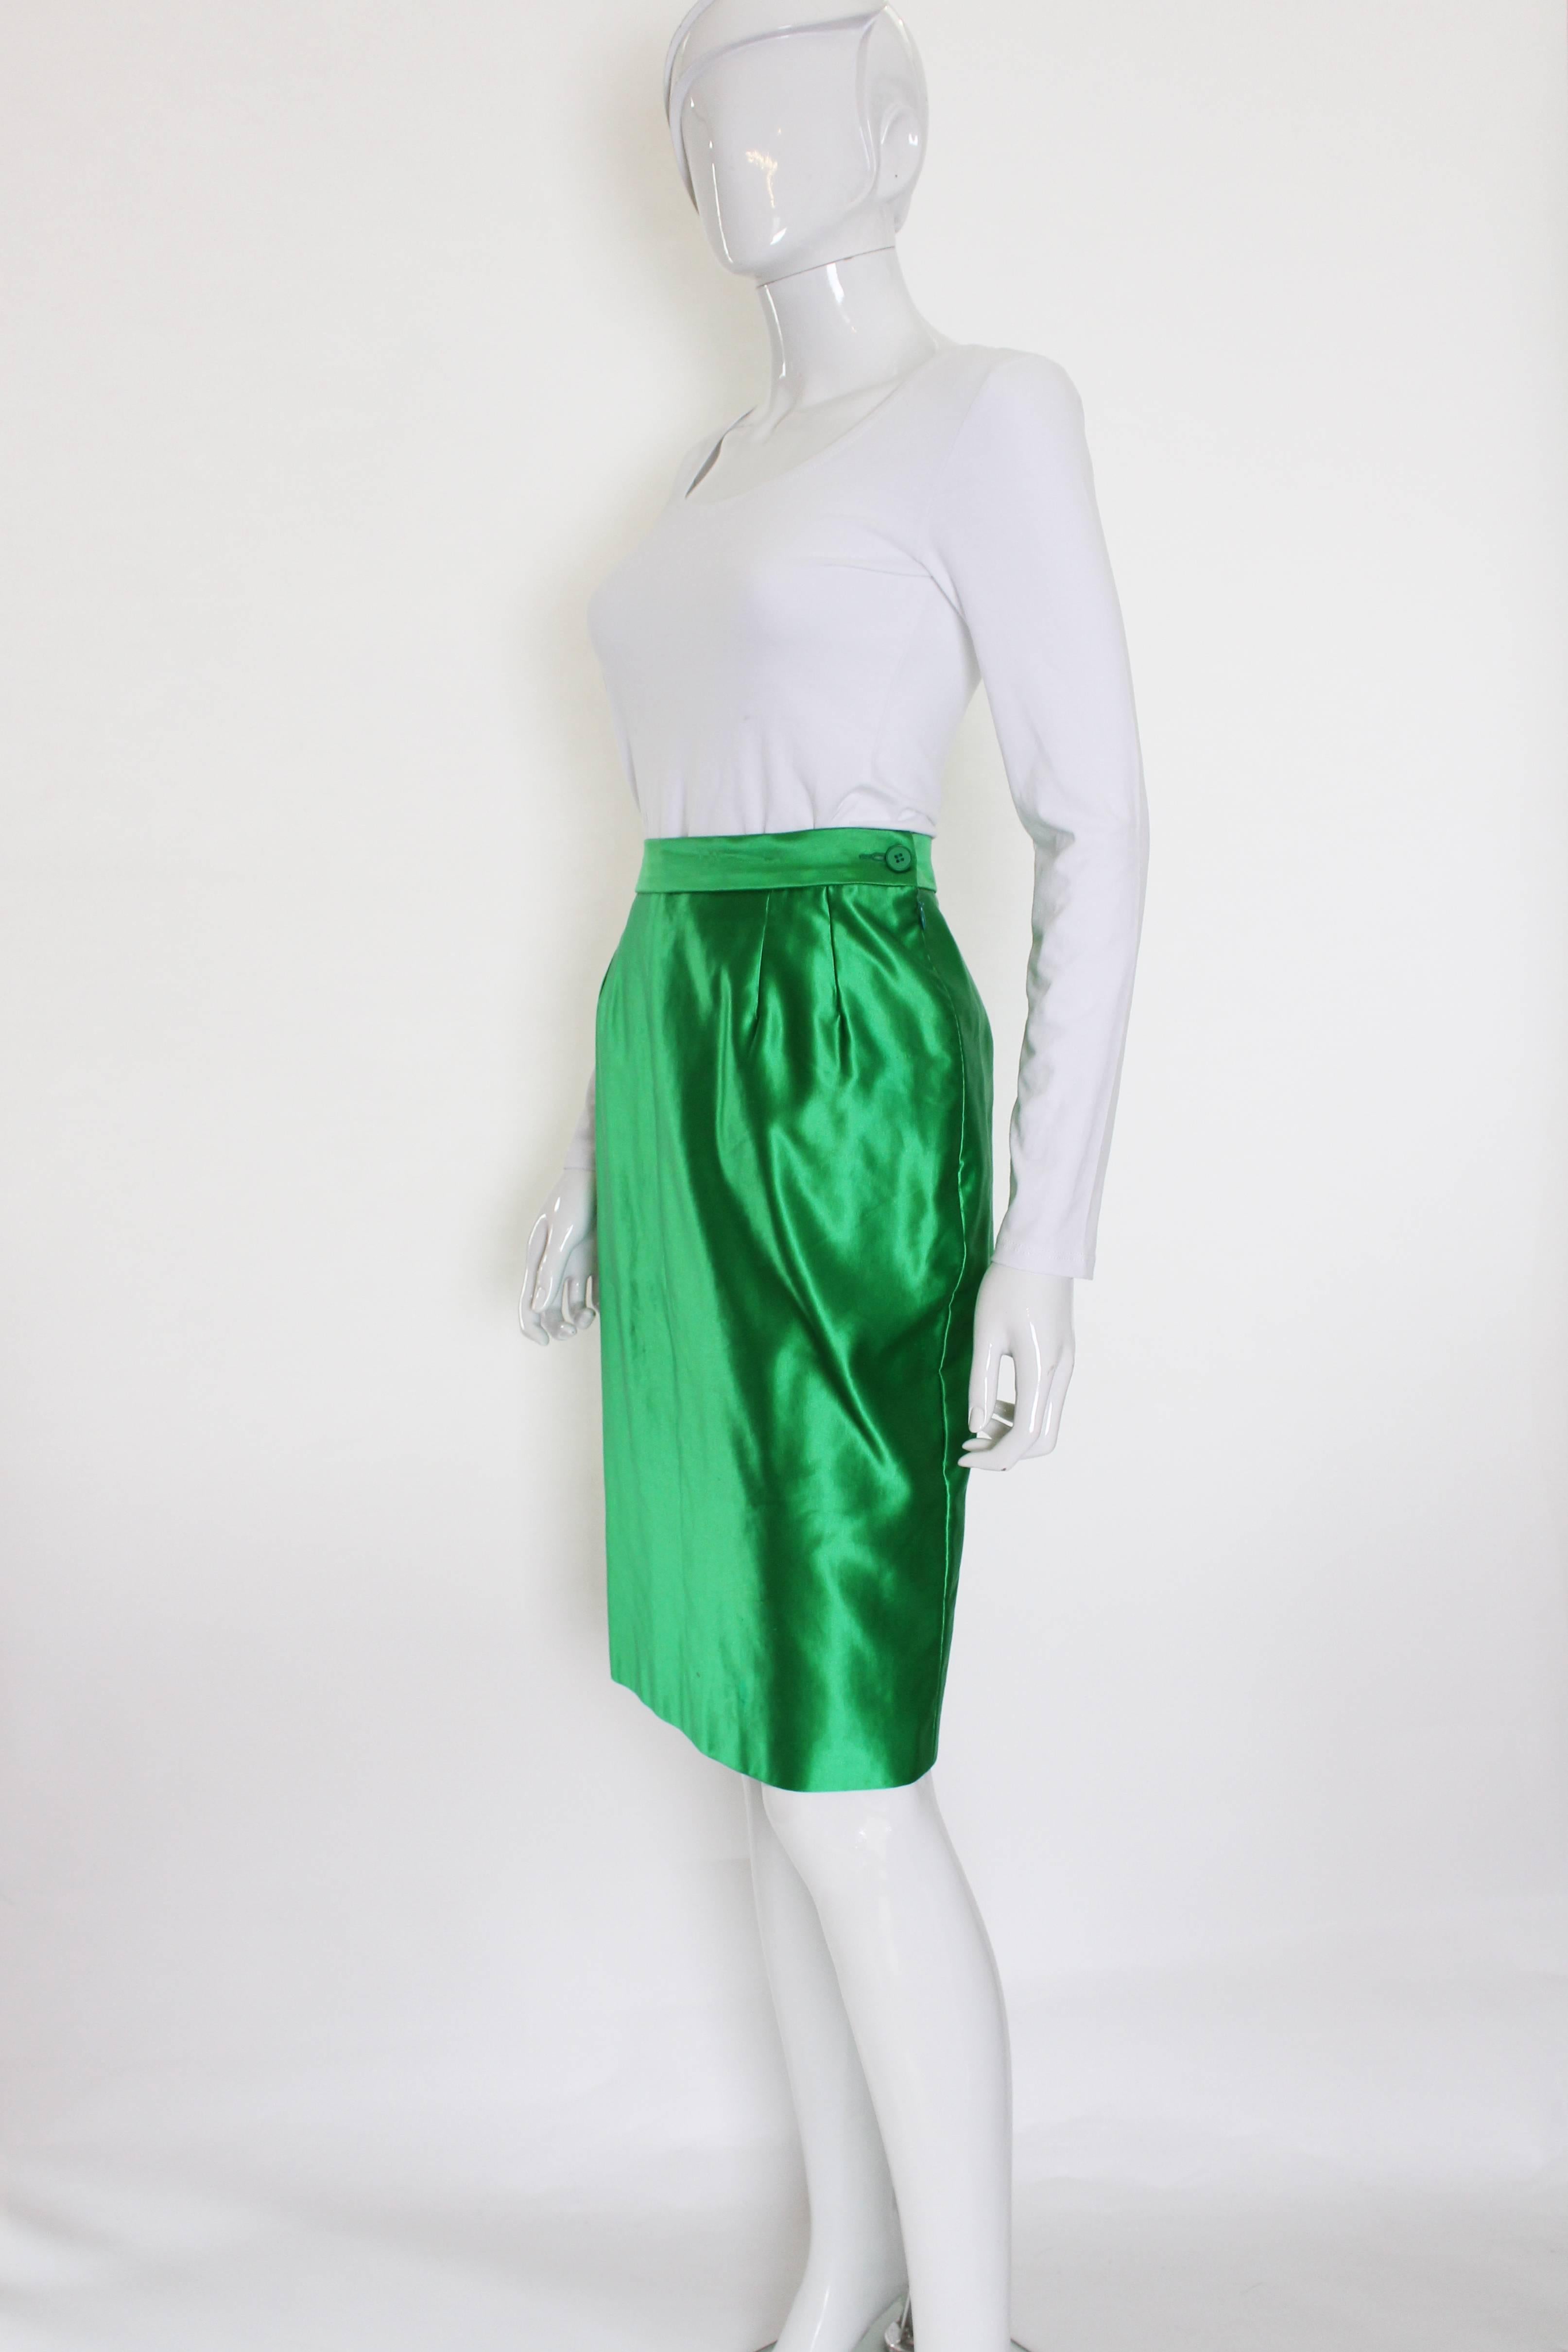 A great green skirt from Yves Saint Laurent,Variatio line.
This skirt is a wonderful colour ,and in a great fabric being, 70% cotton, 30% silk.The skirt has a side zip opening,and a 6'' slit at the back.

